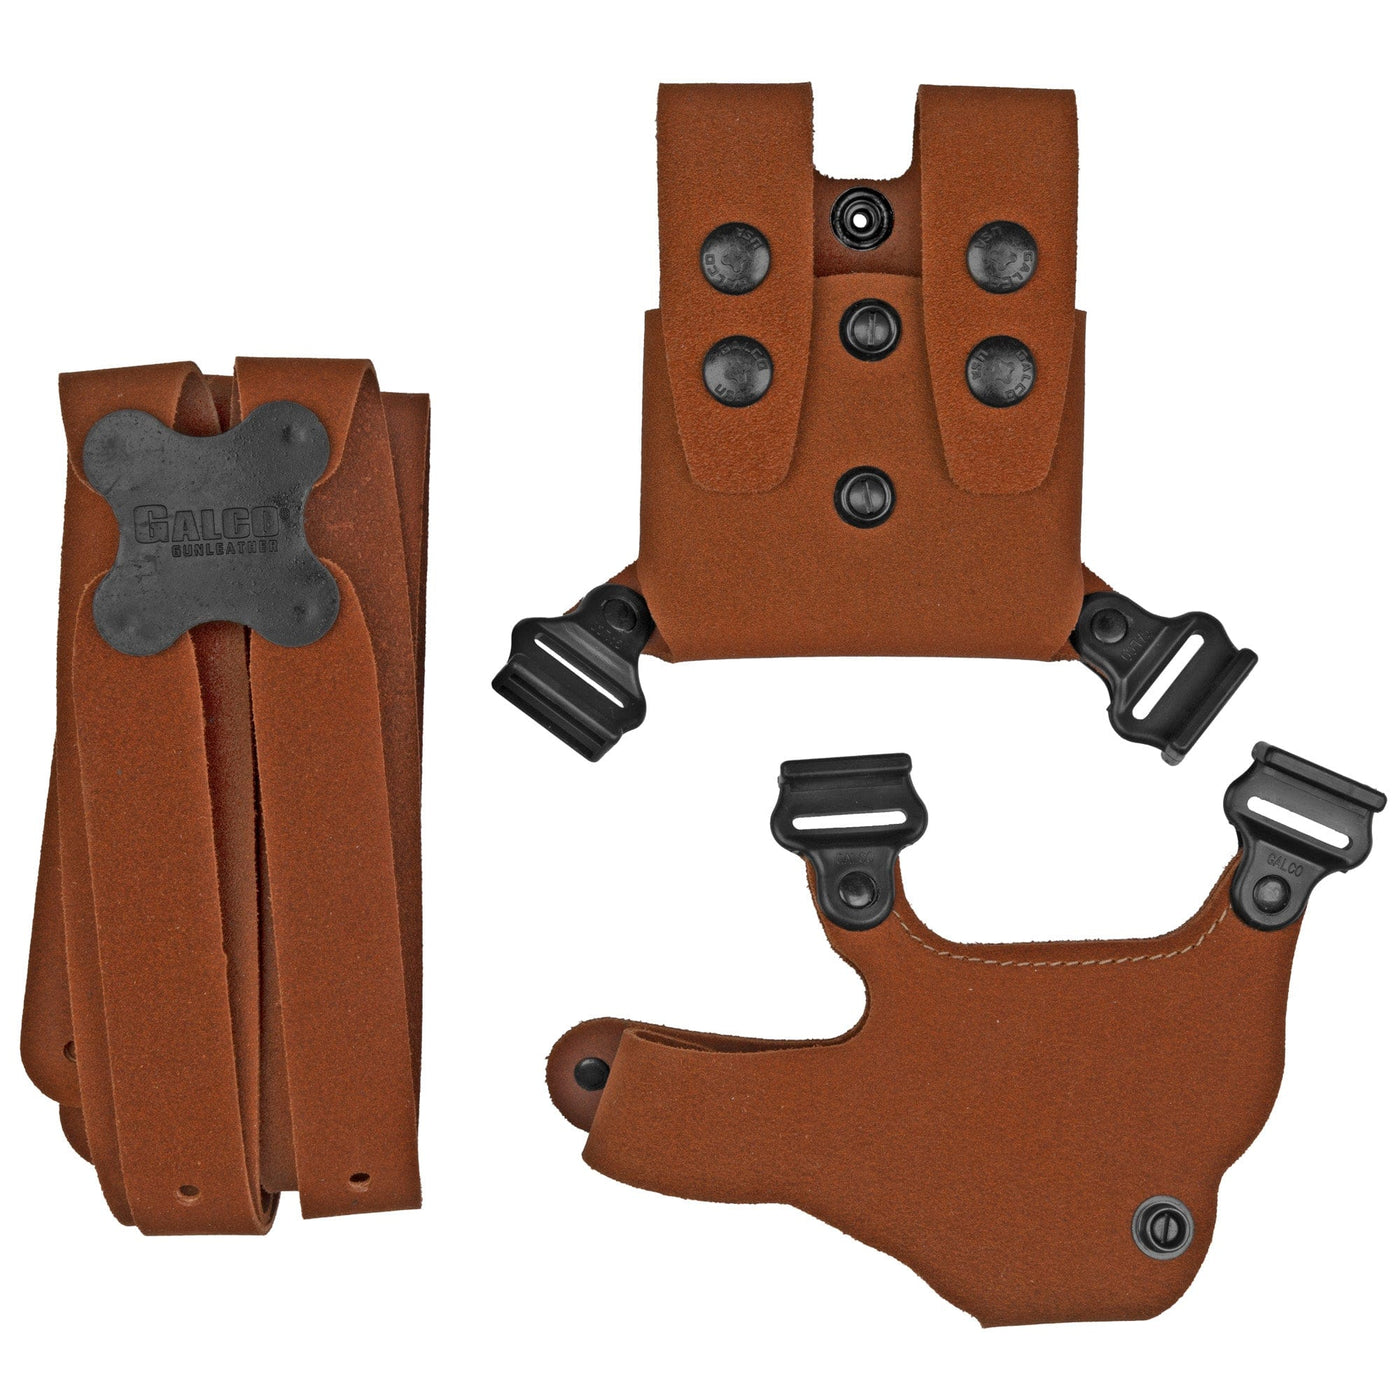 Galco Galco Classic Lite 2 Shldr Hol - Rh Leather Sig P365 Natural Firearm Accessories